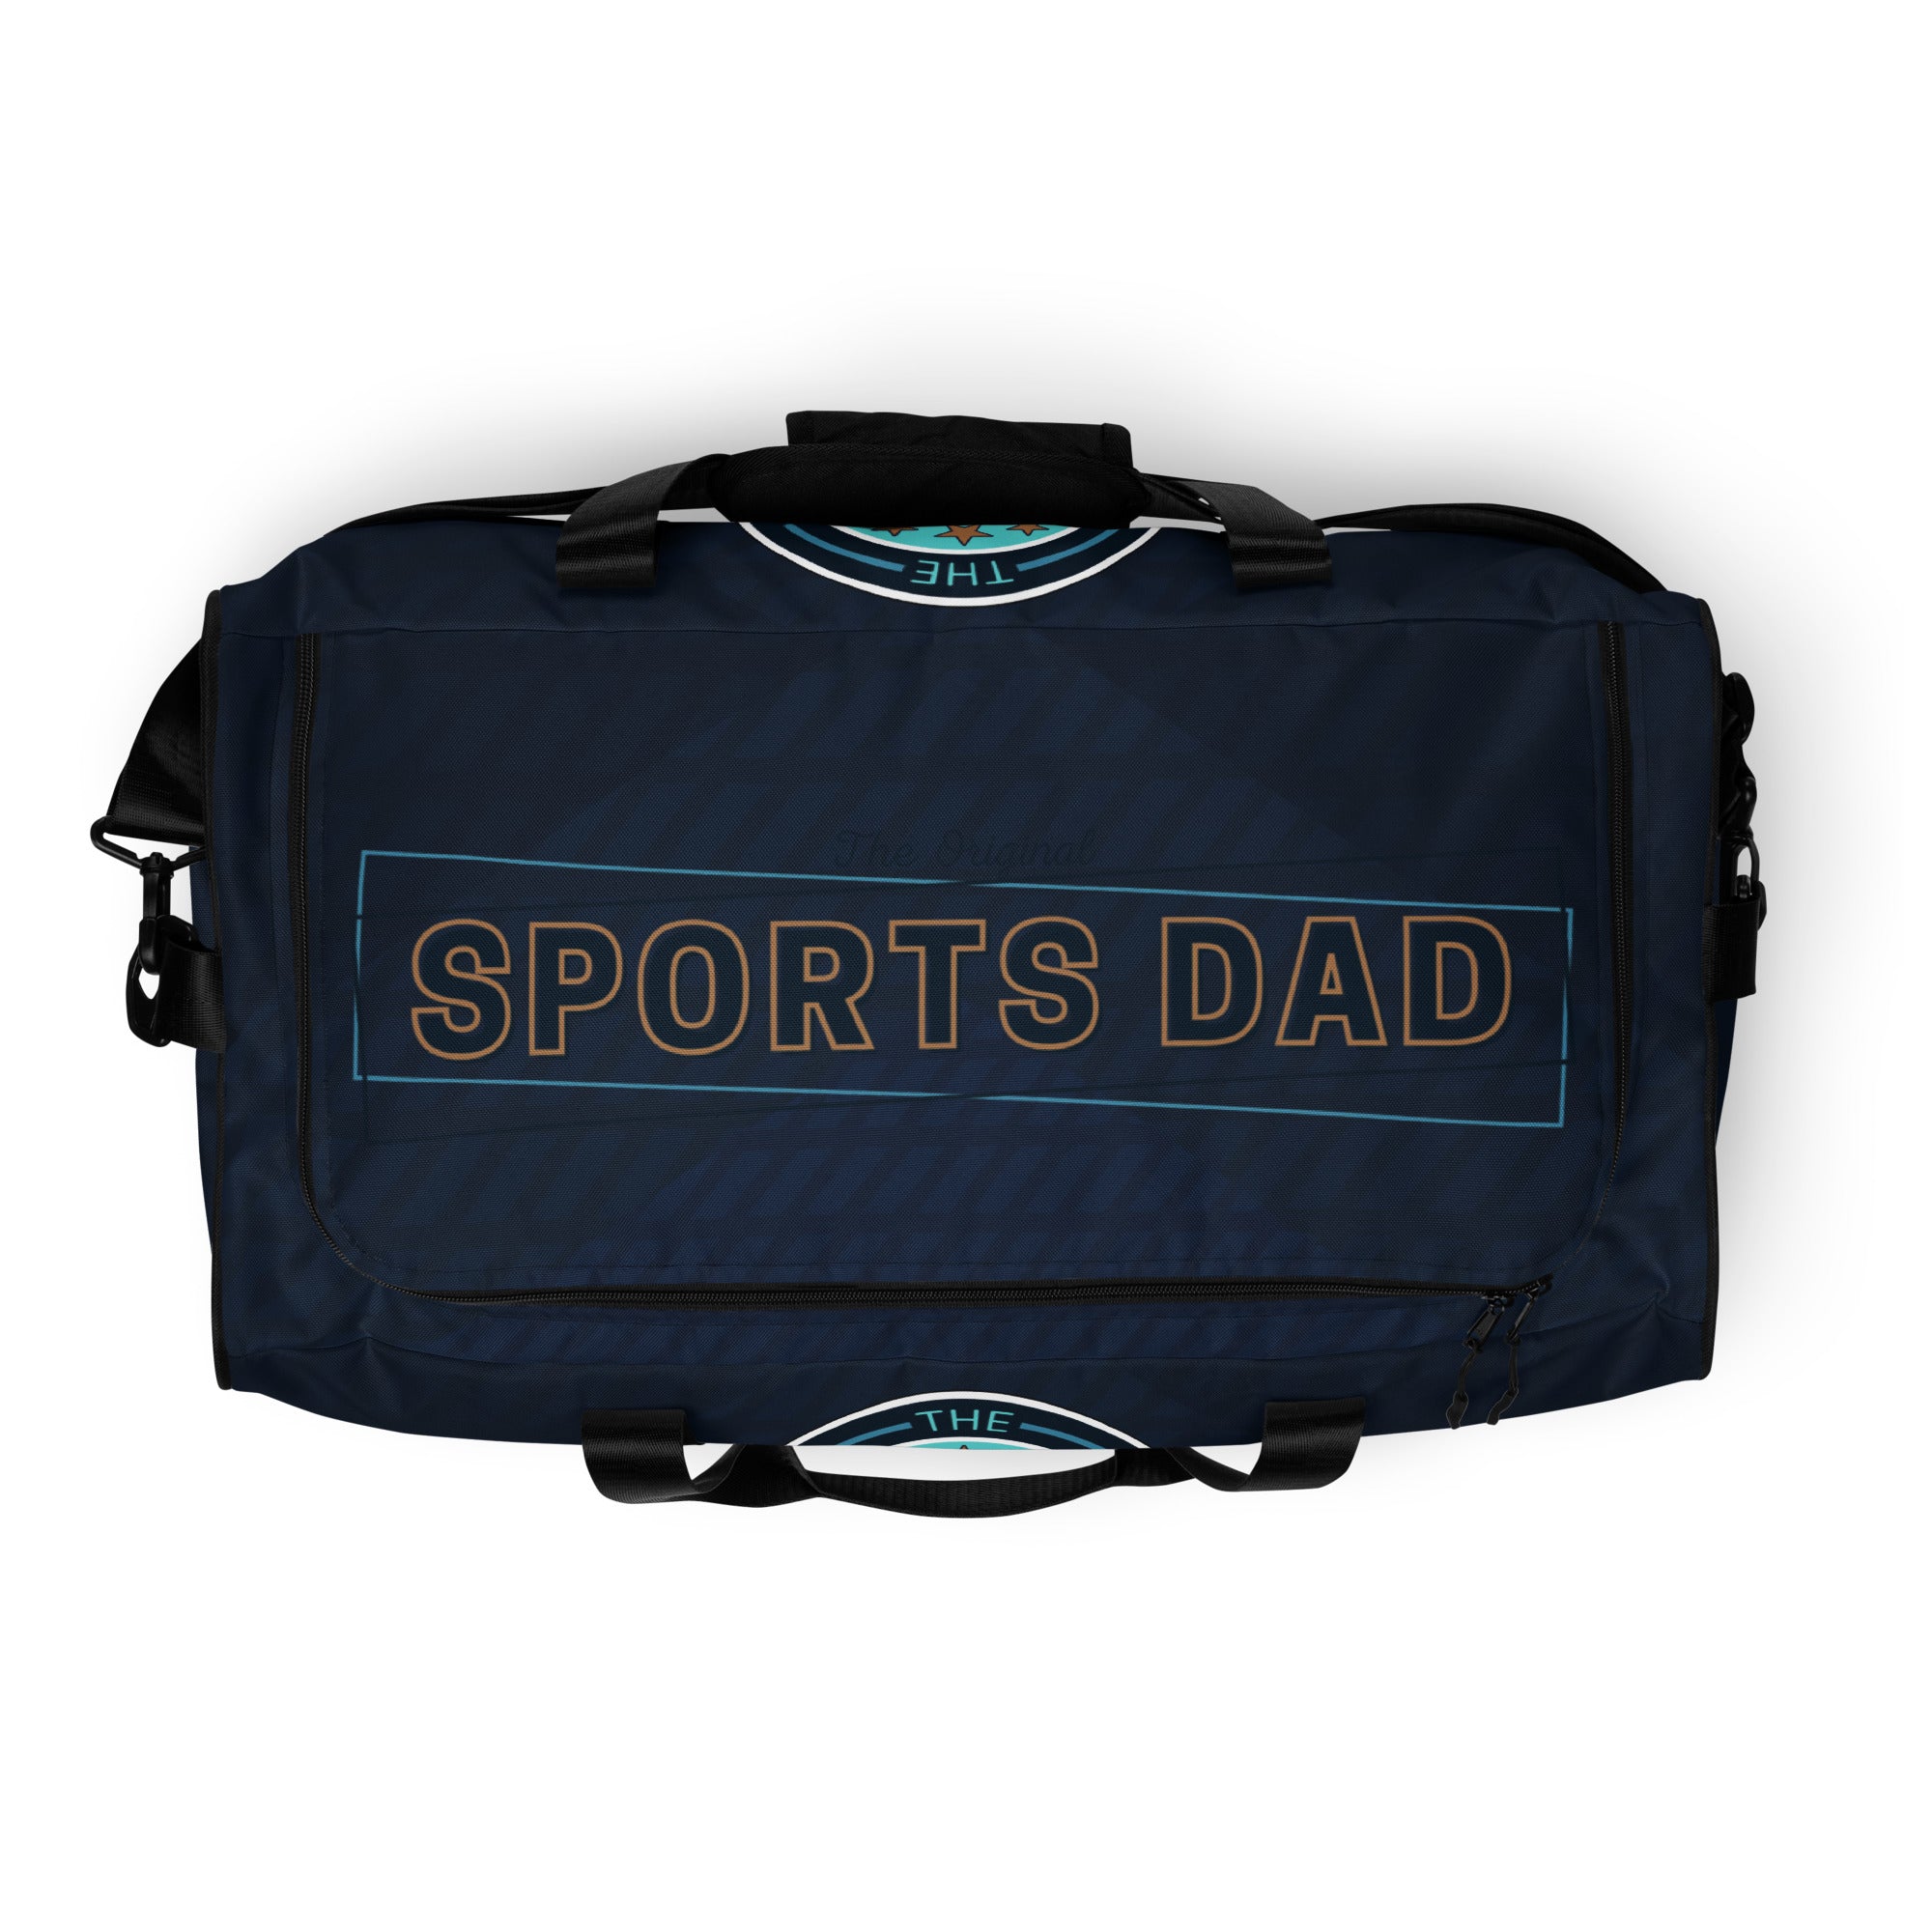 Sports Dad Ultimate Duffle Bag - Gravy Navy